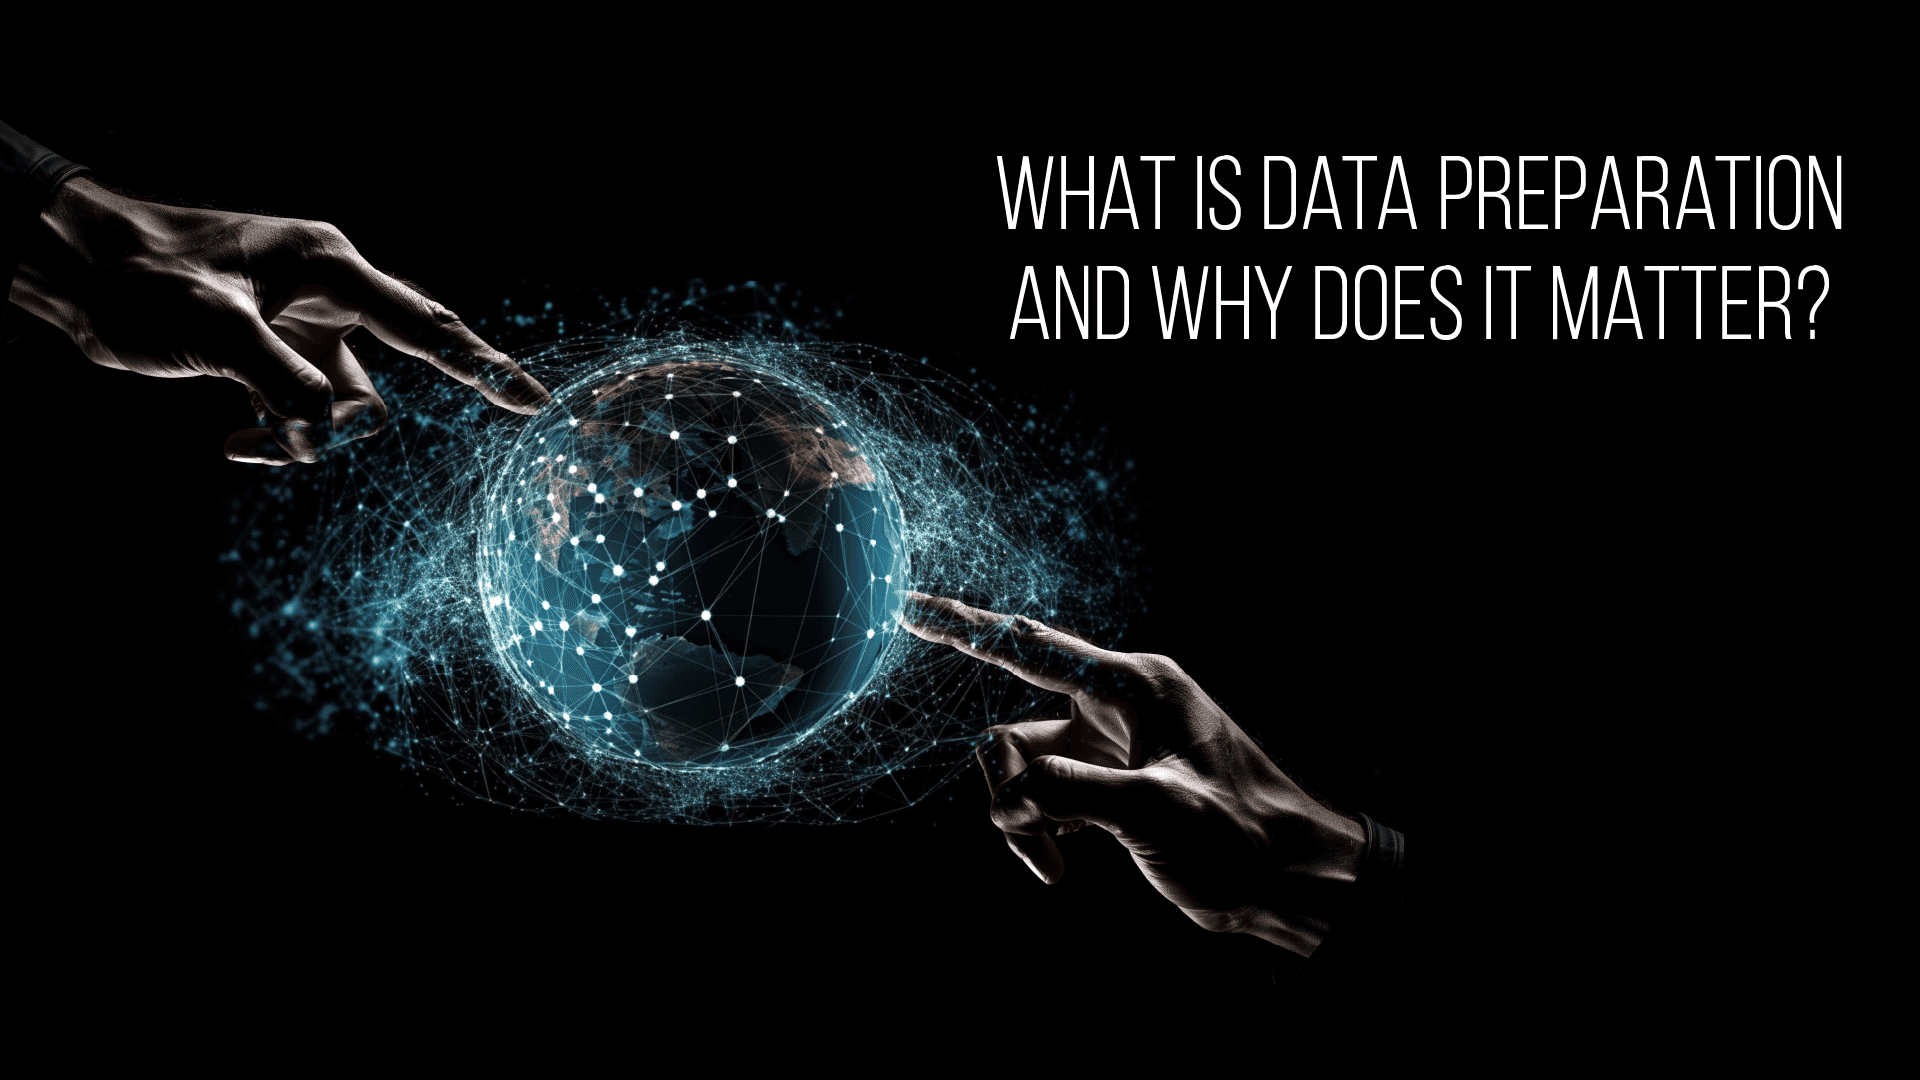 What is Data Preparation and Why Does it Matter?